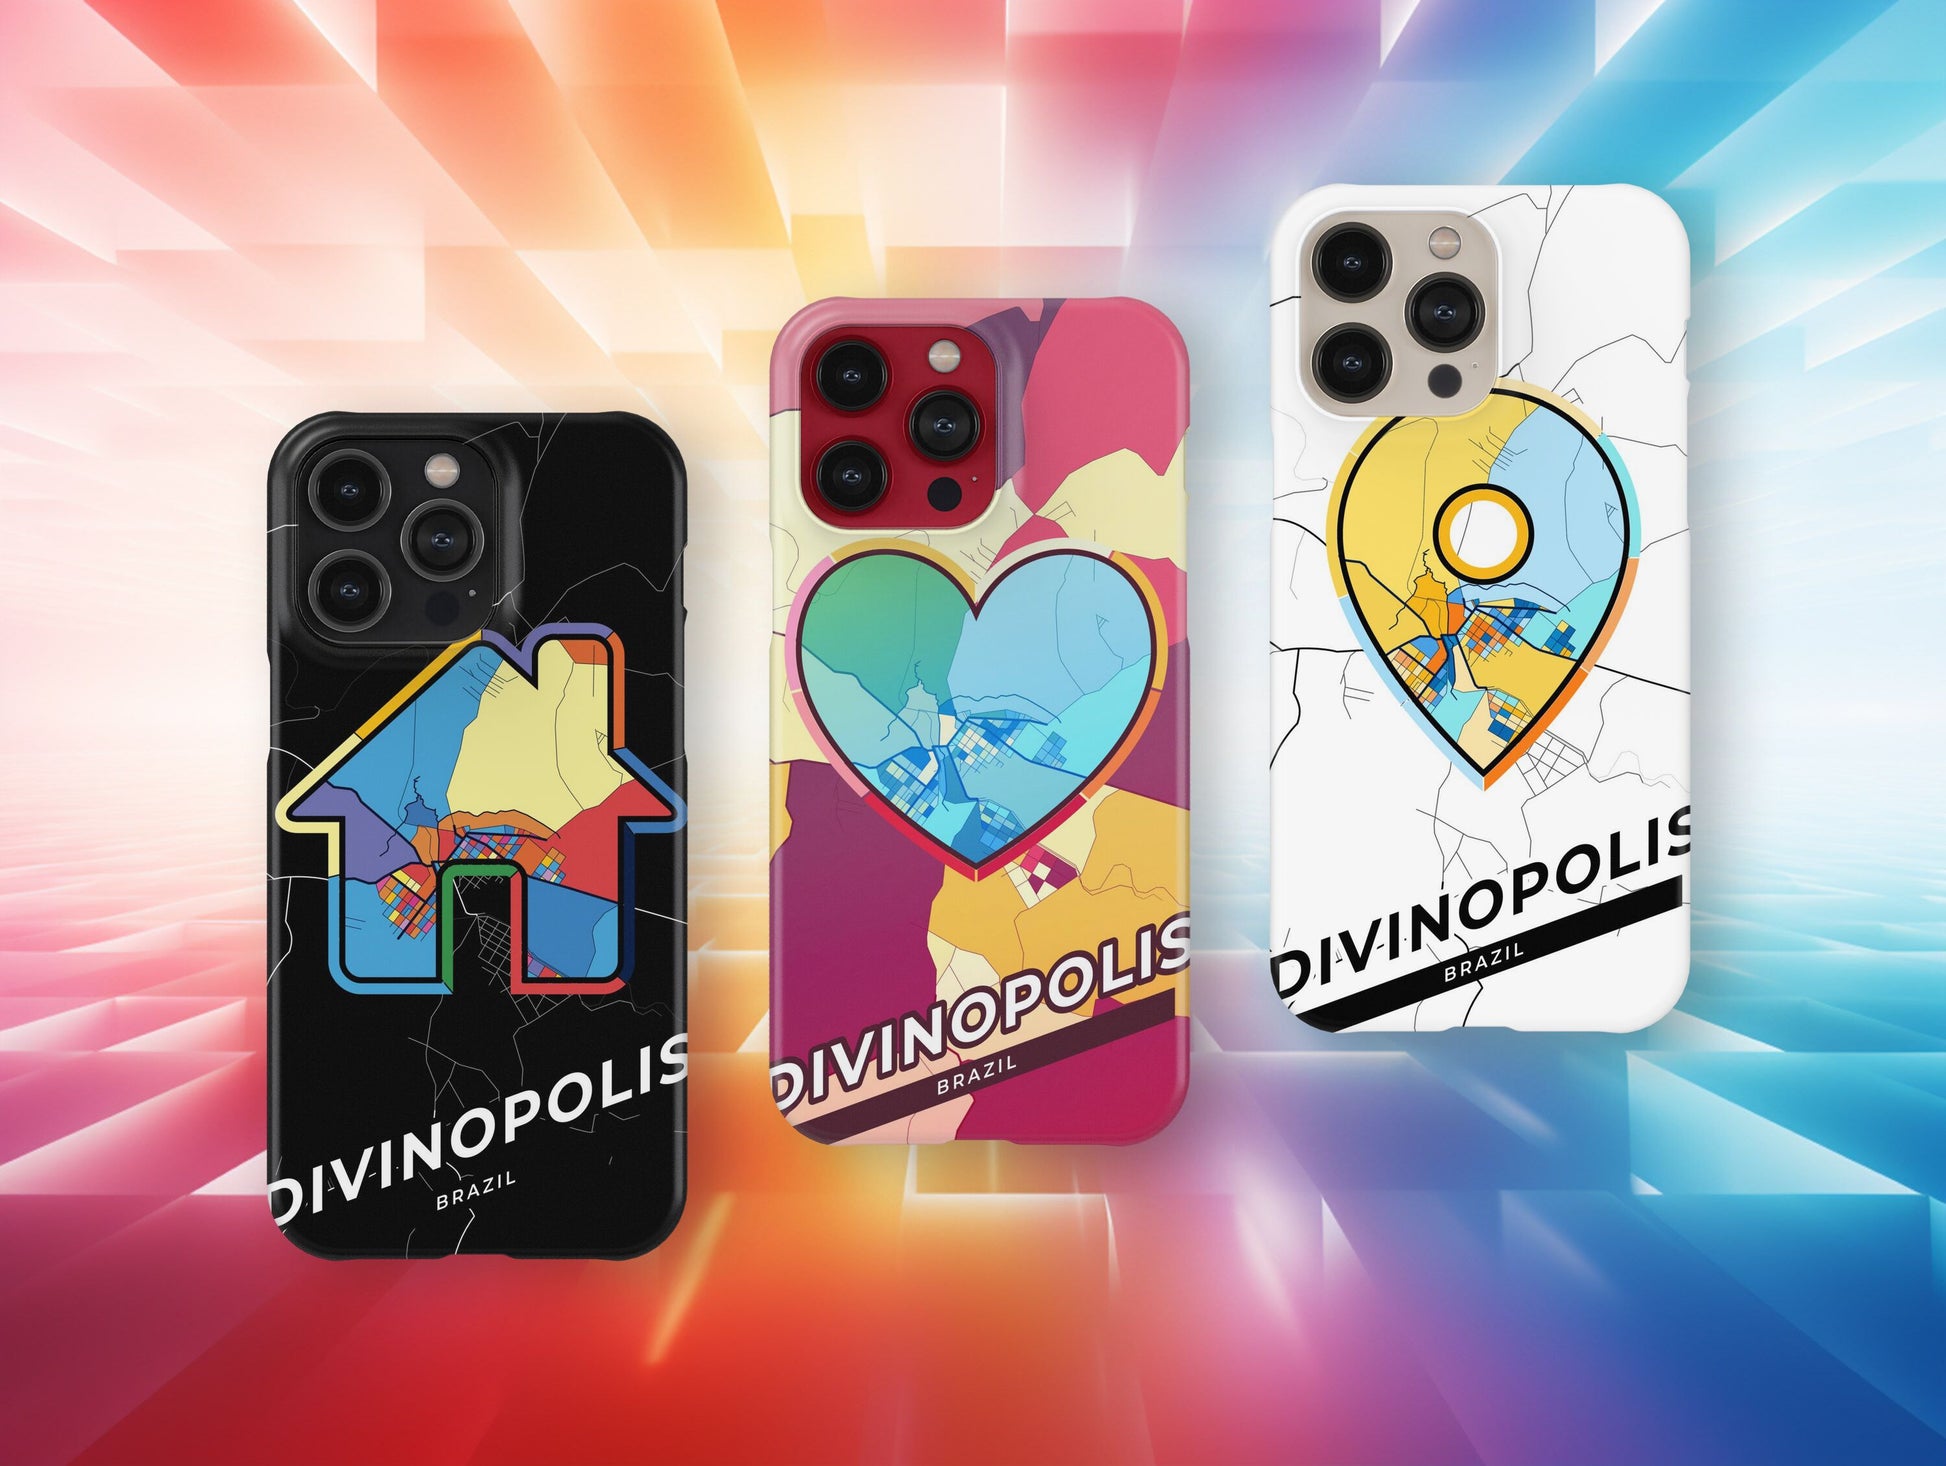 Divinopolis Brazil slim phone case with colorful icon. Birthday, wedding or housewarming gift. Couple match cases.